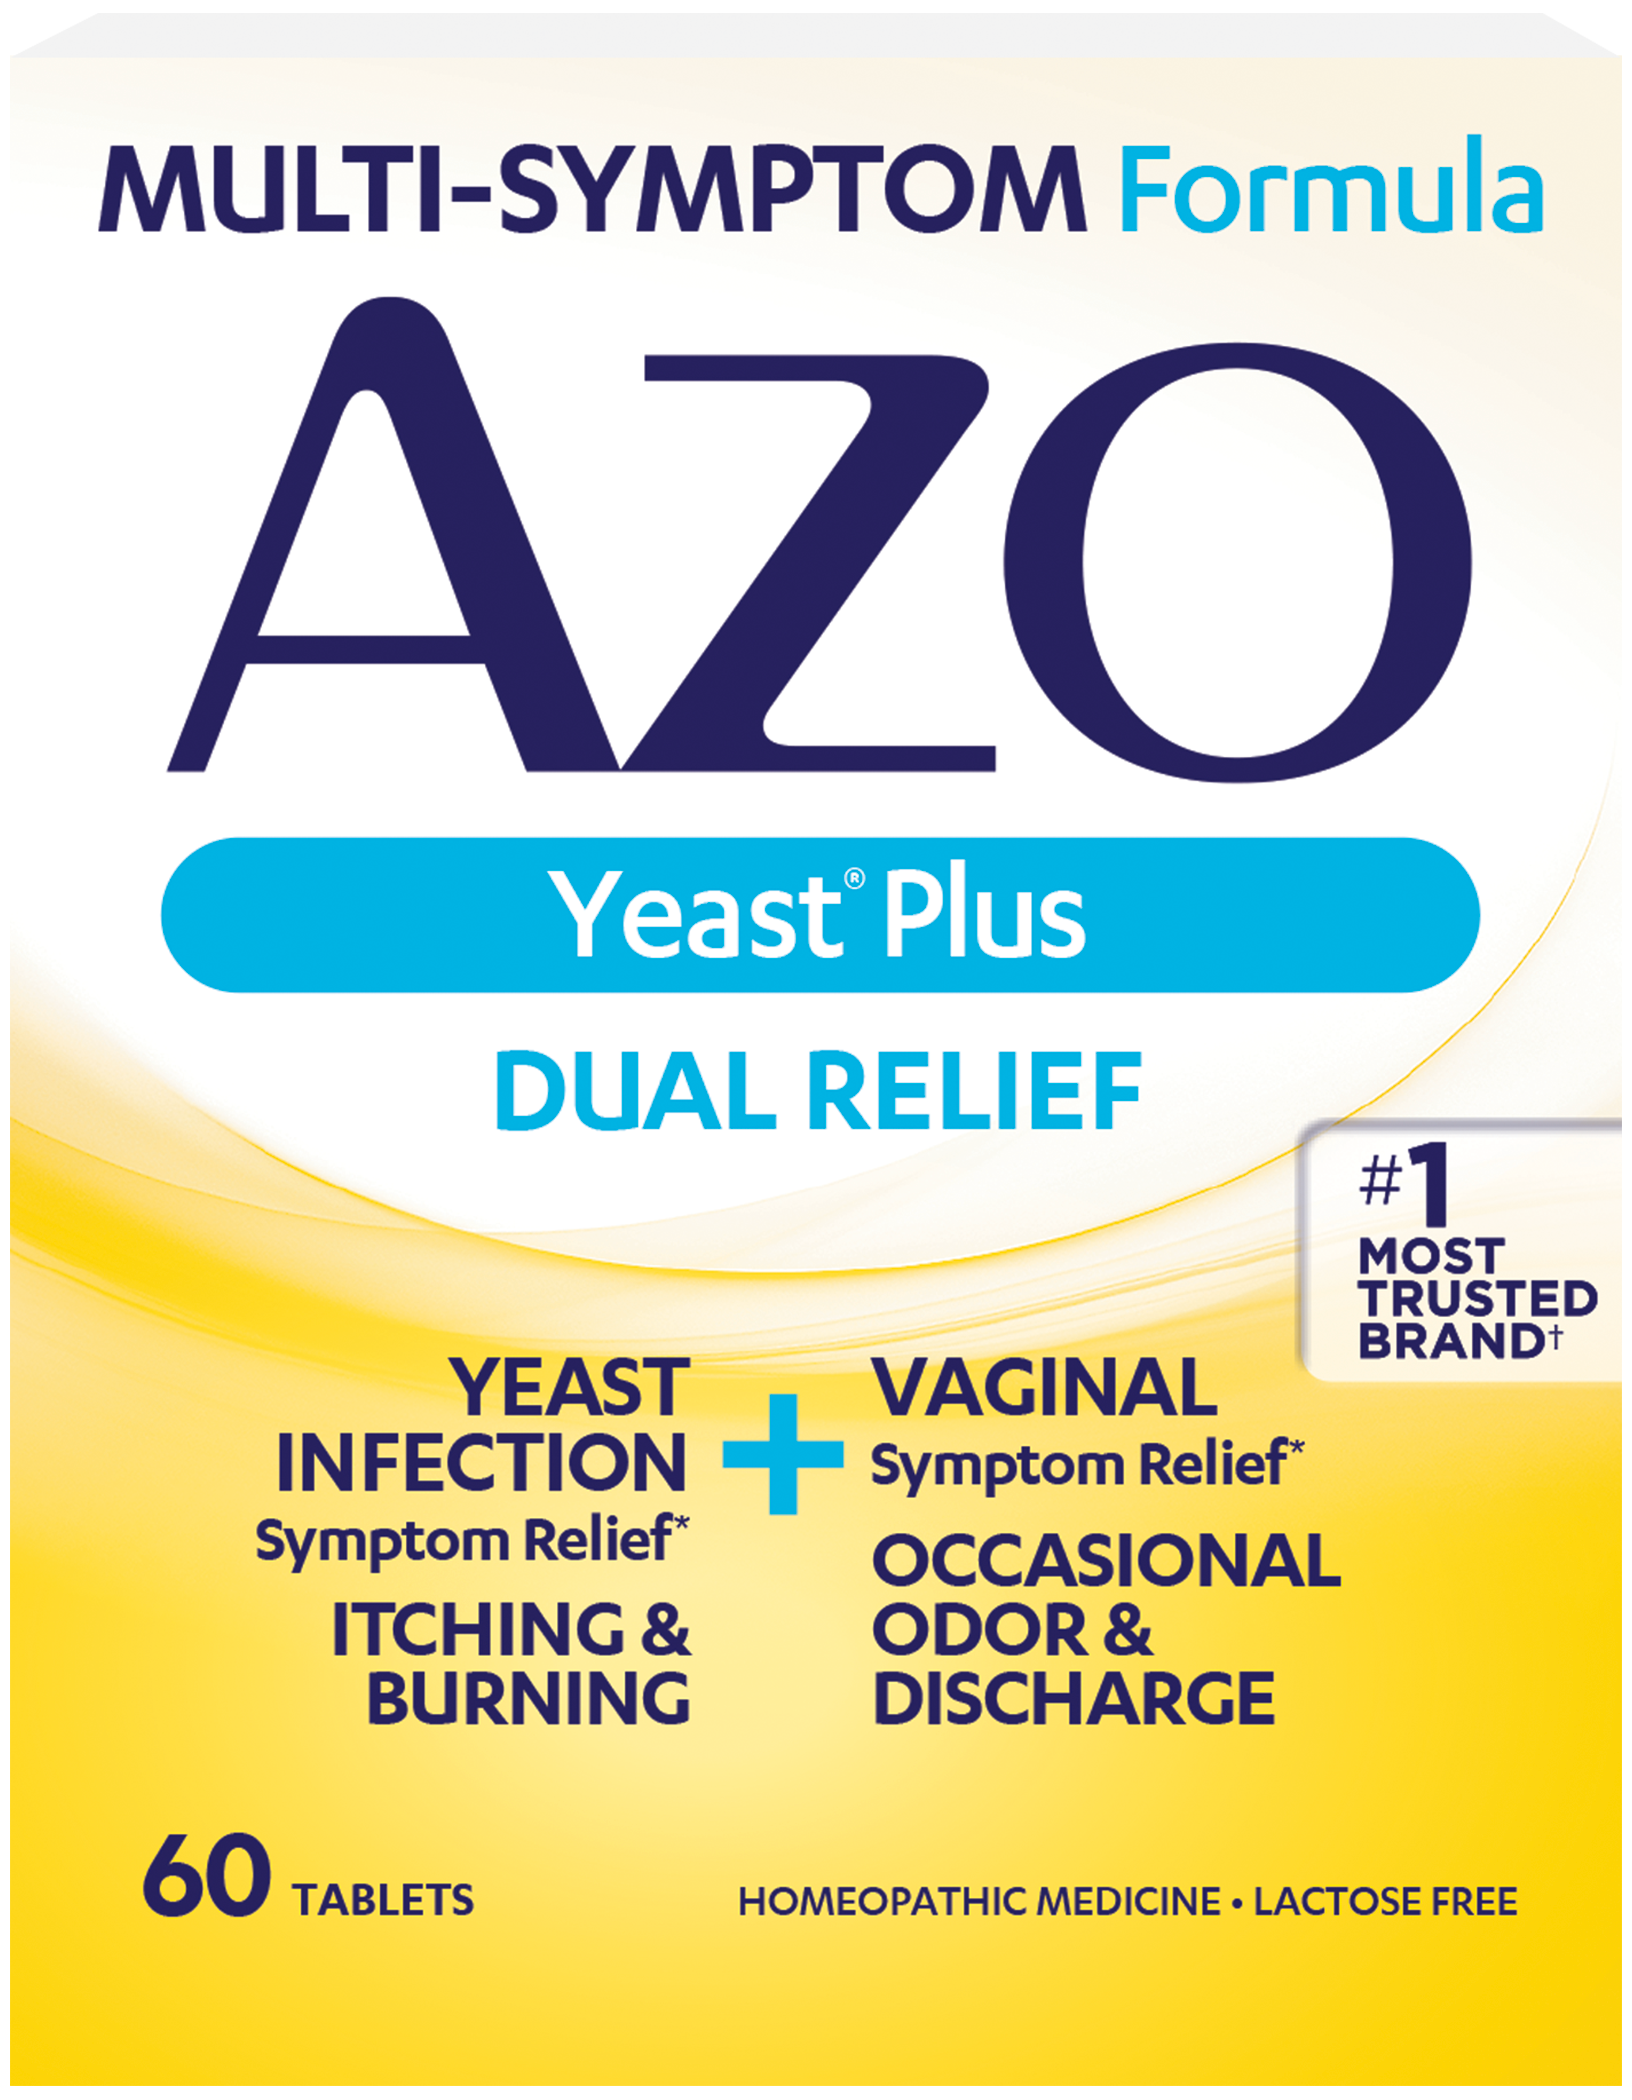 AZO YeastÂ® Plus Helps to Relieve Symptoms of Vaginal Infection*